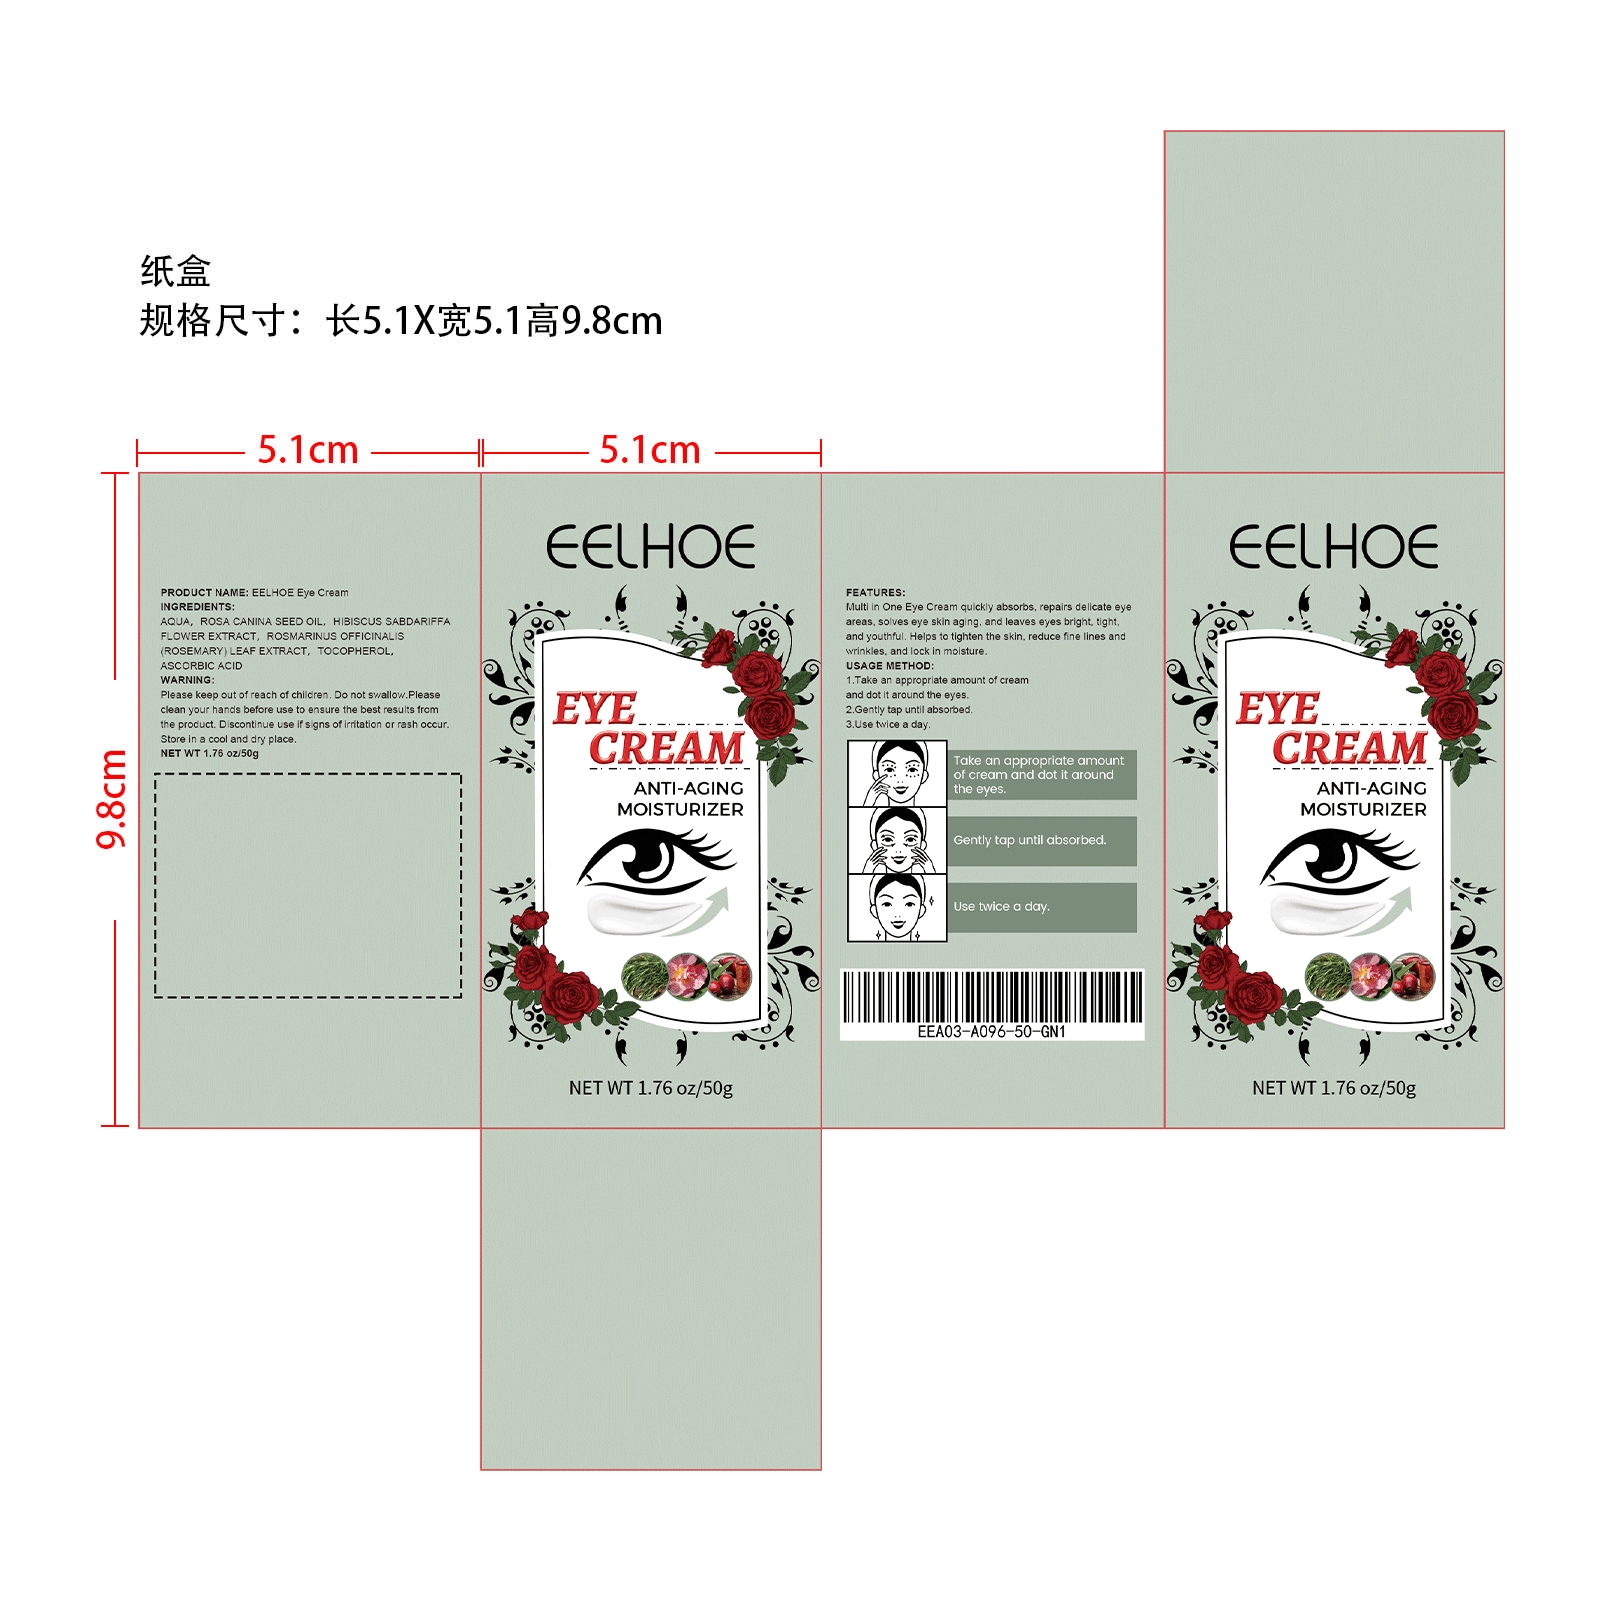 Package label